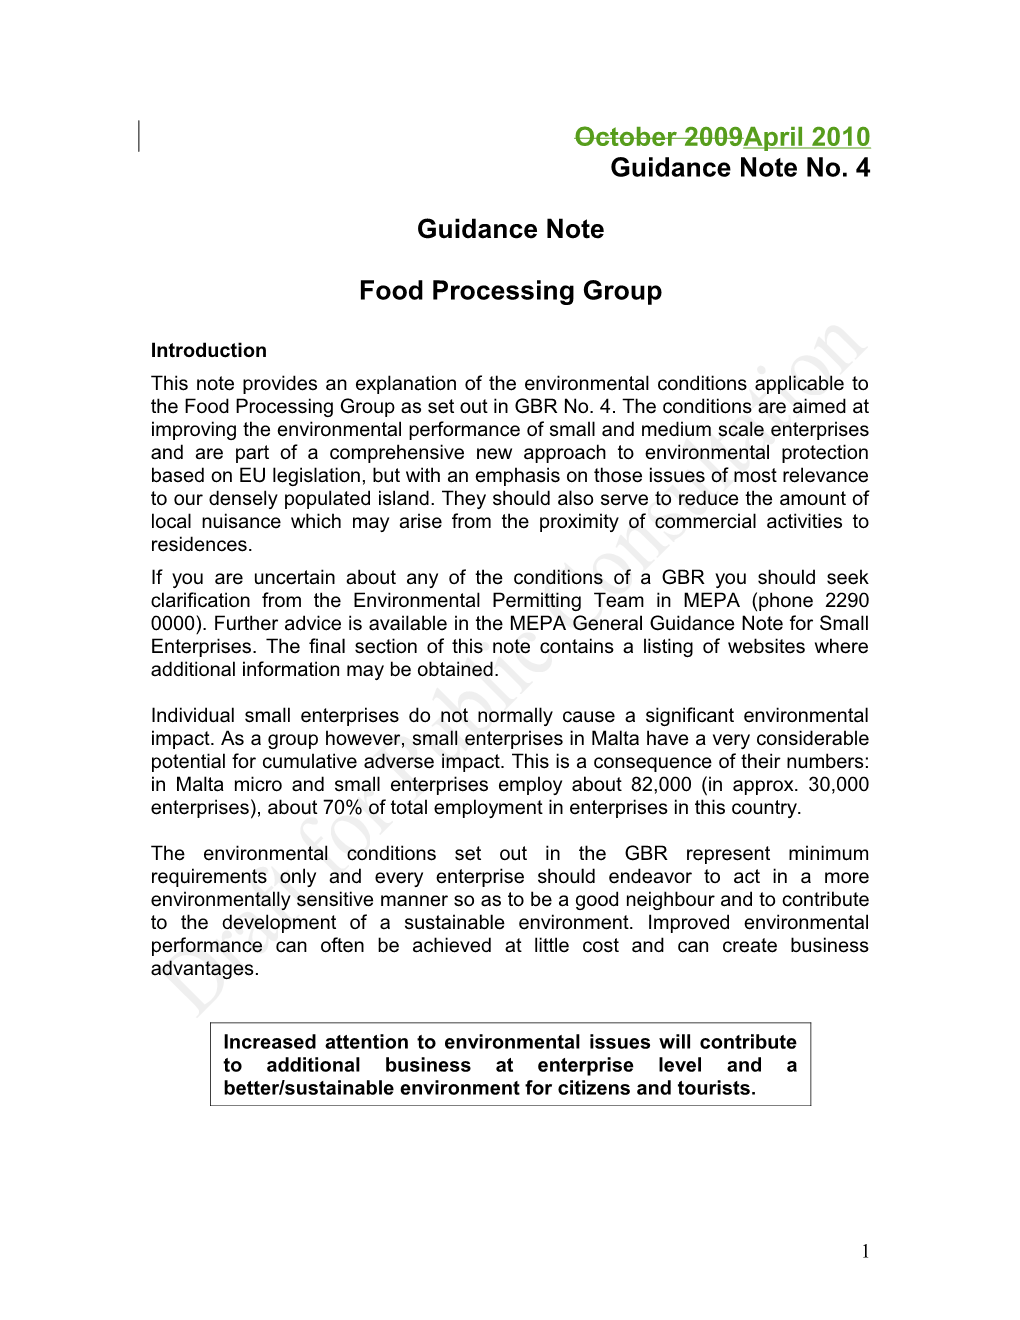 Guidance Note Food